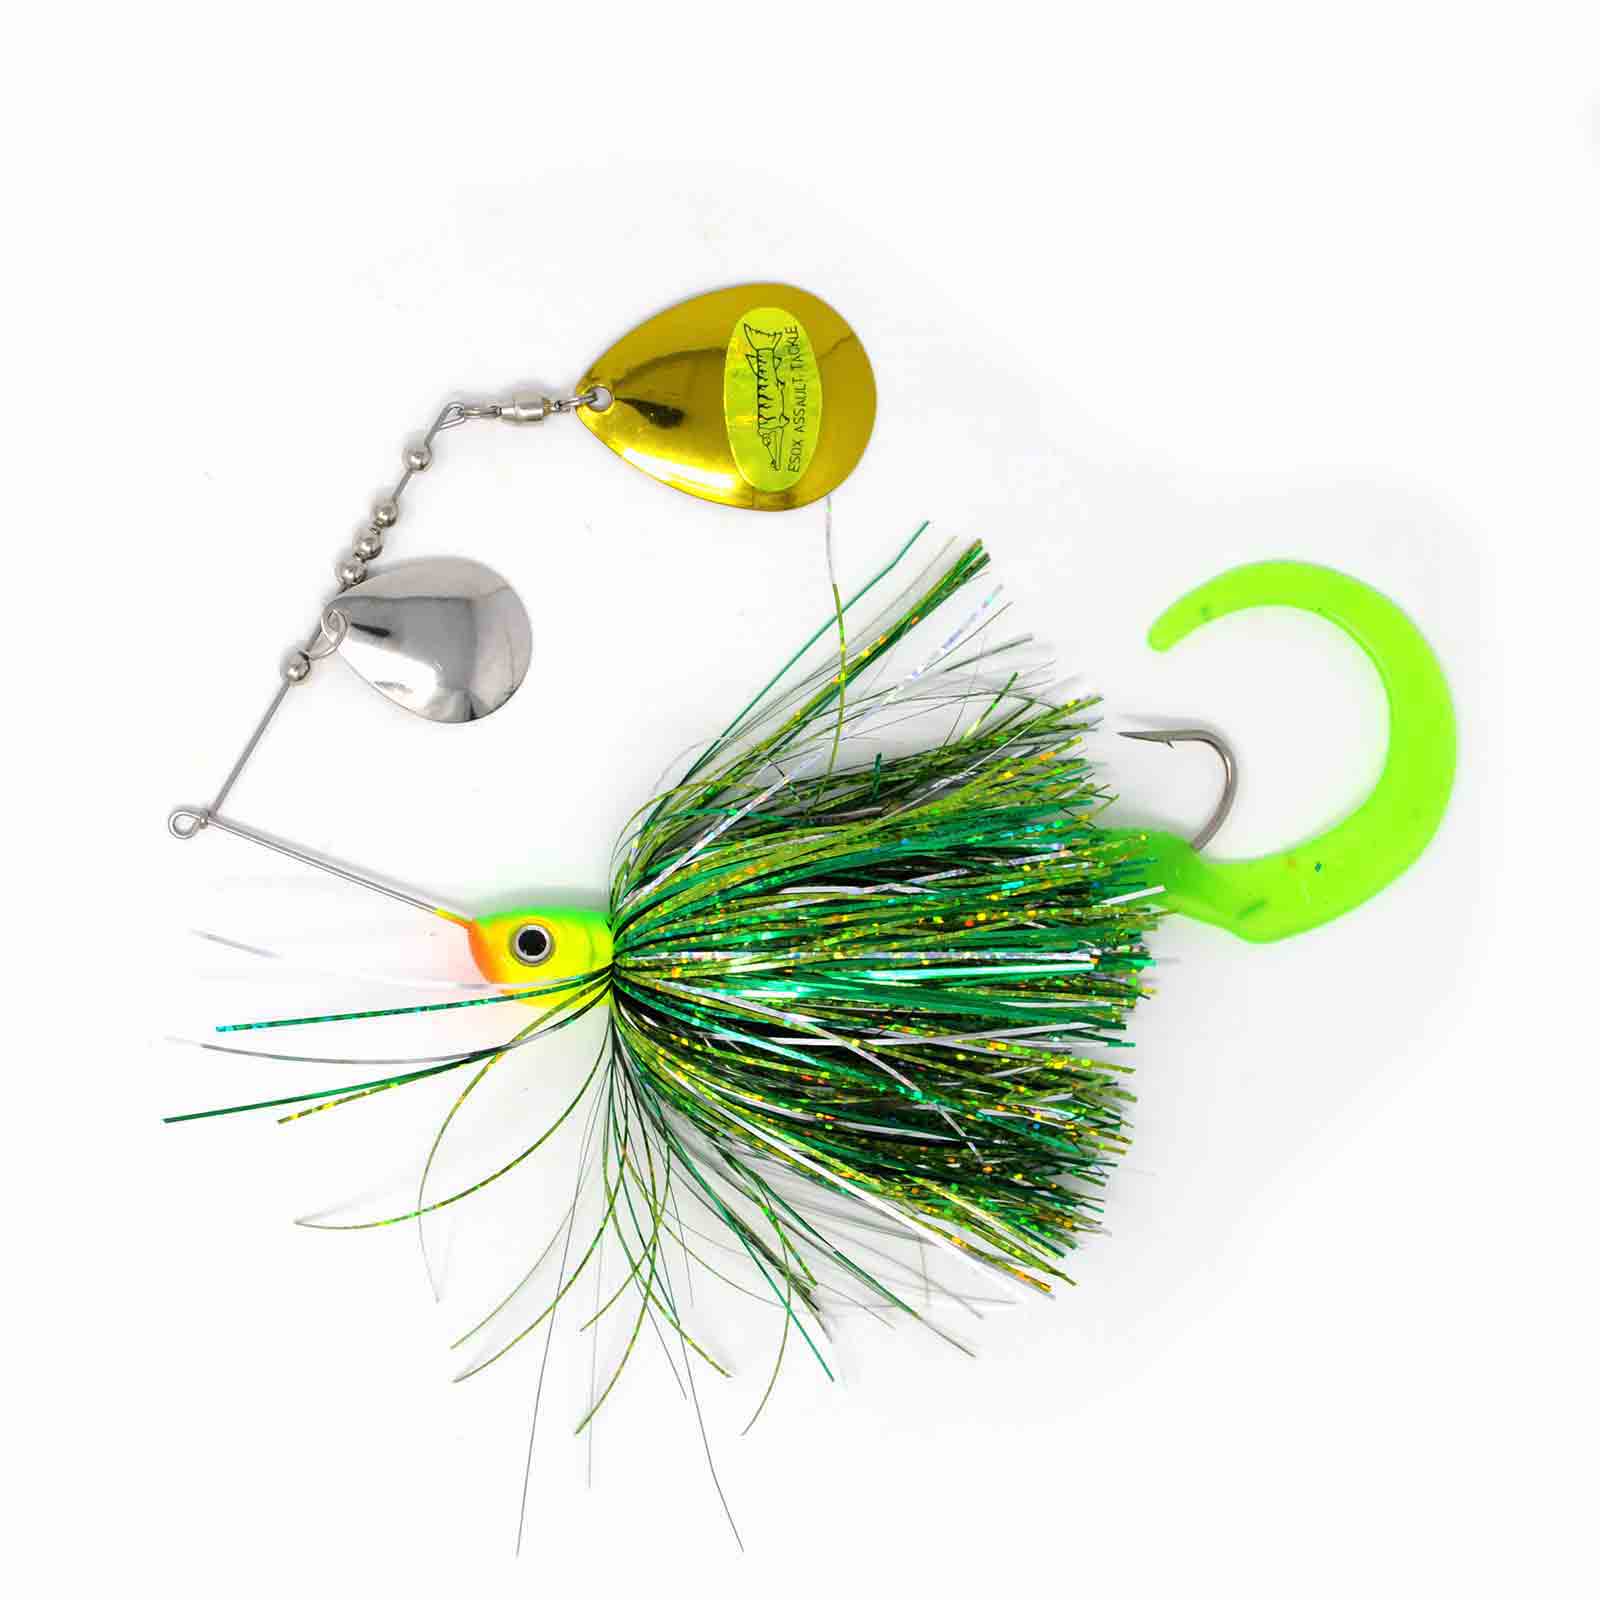 View of Spinnerbaits Esox Assault Spinnerbait Colorado 1oz Gang Green available at EZOKO Pike and Musky Shop